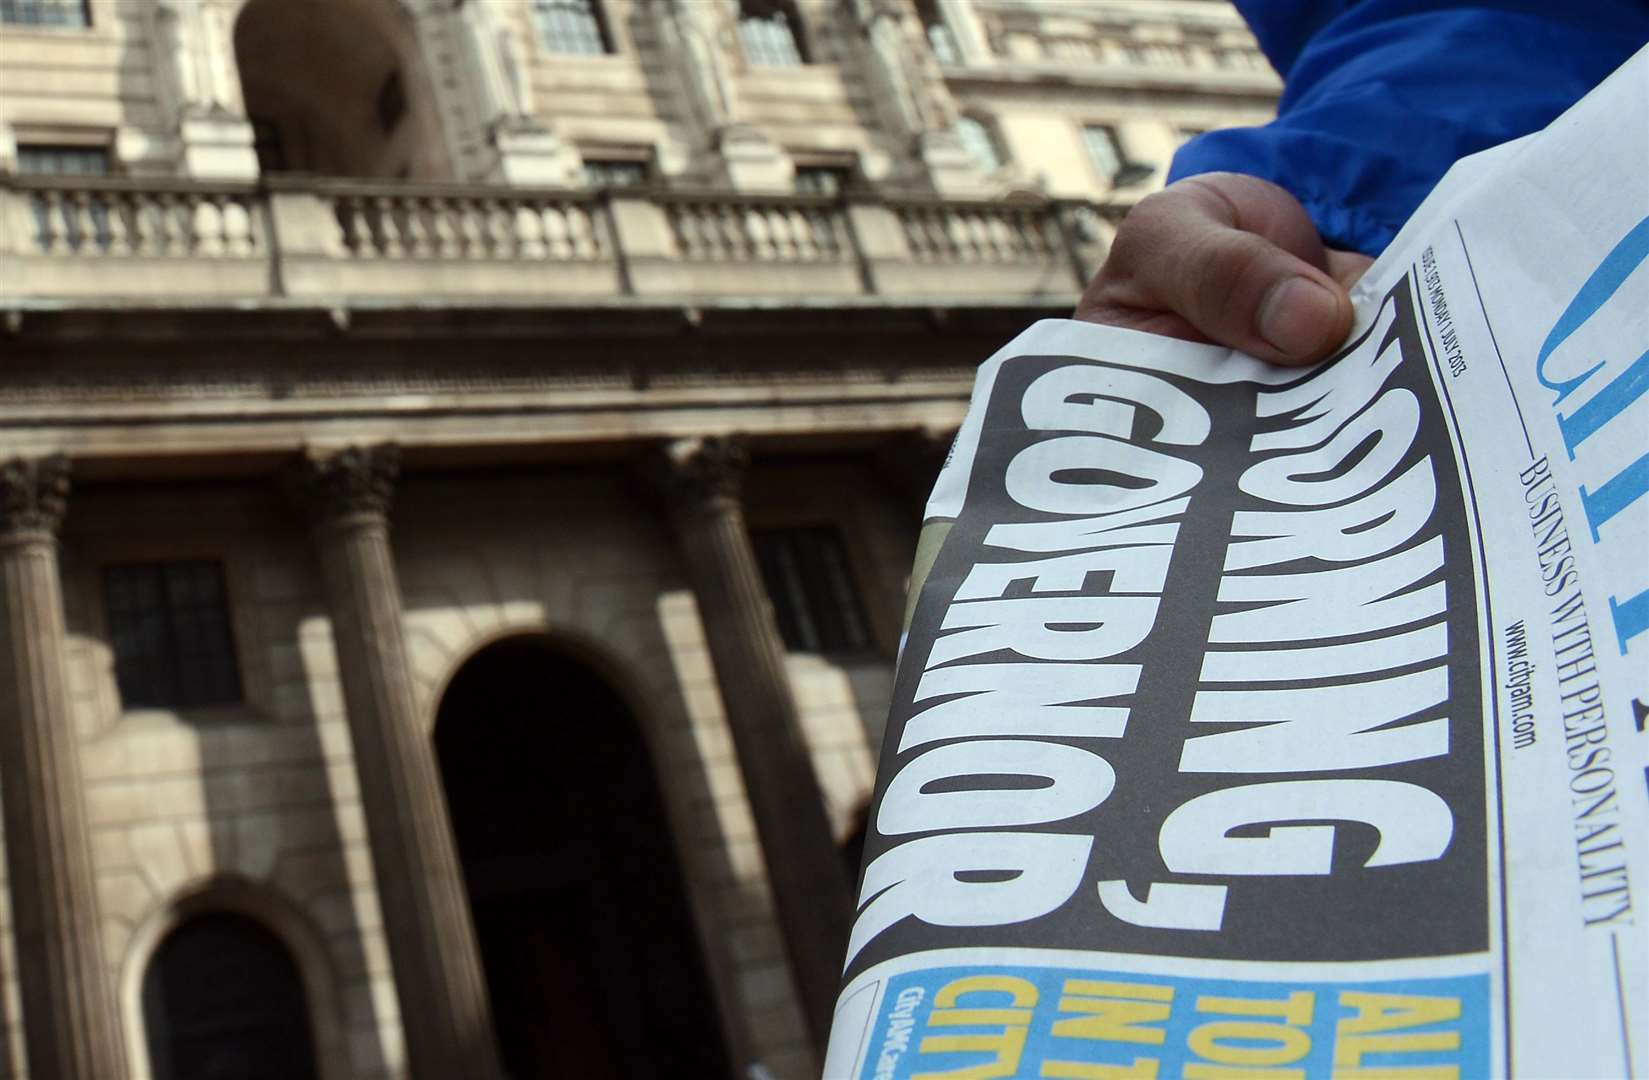 City AM has been handed out at commuter hubs in London for 18 years (Stefan Rousseau/PA)